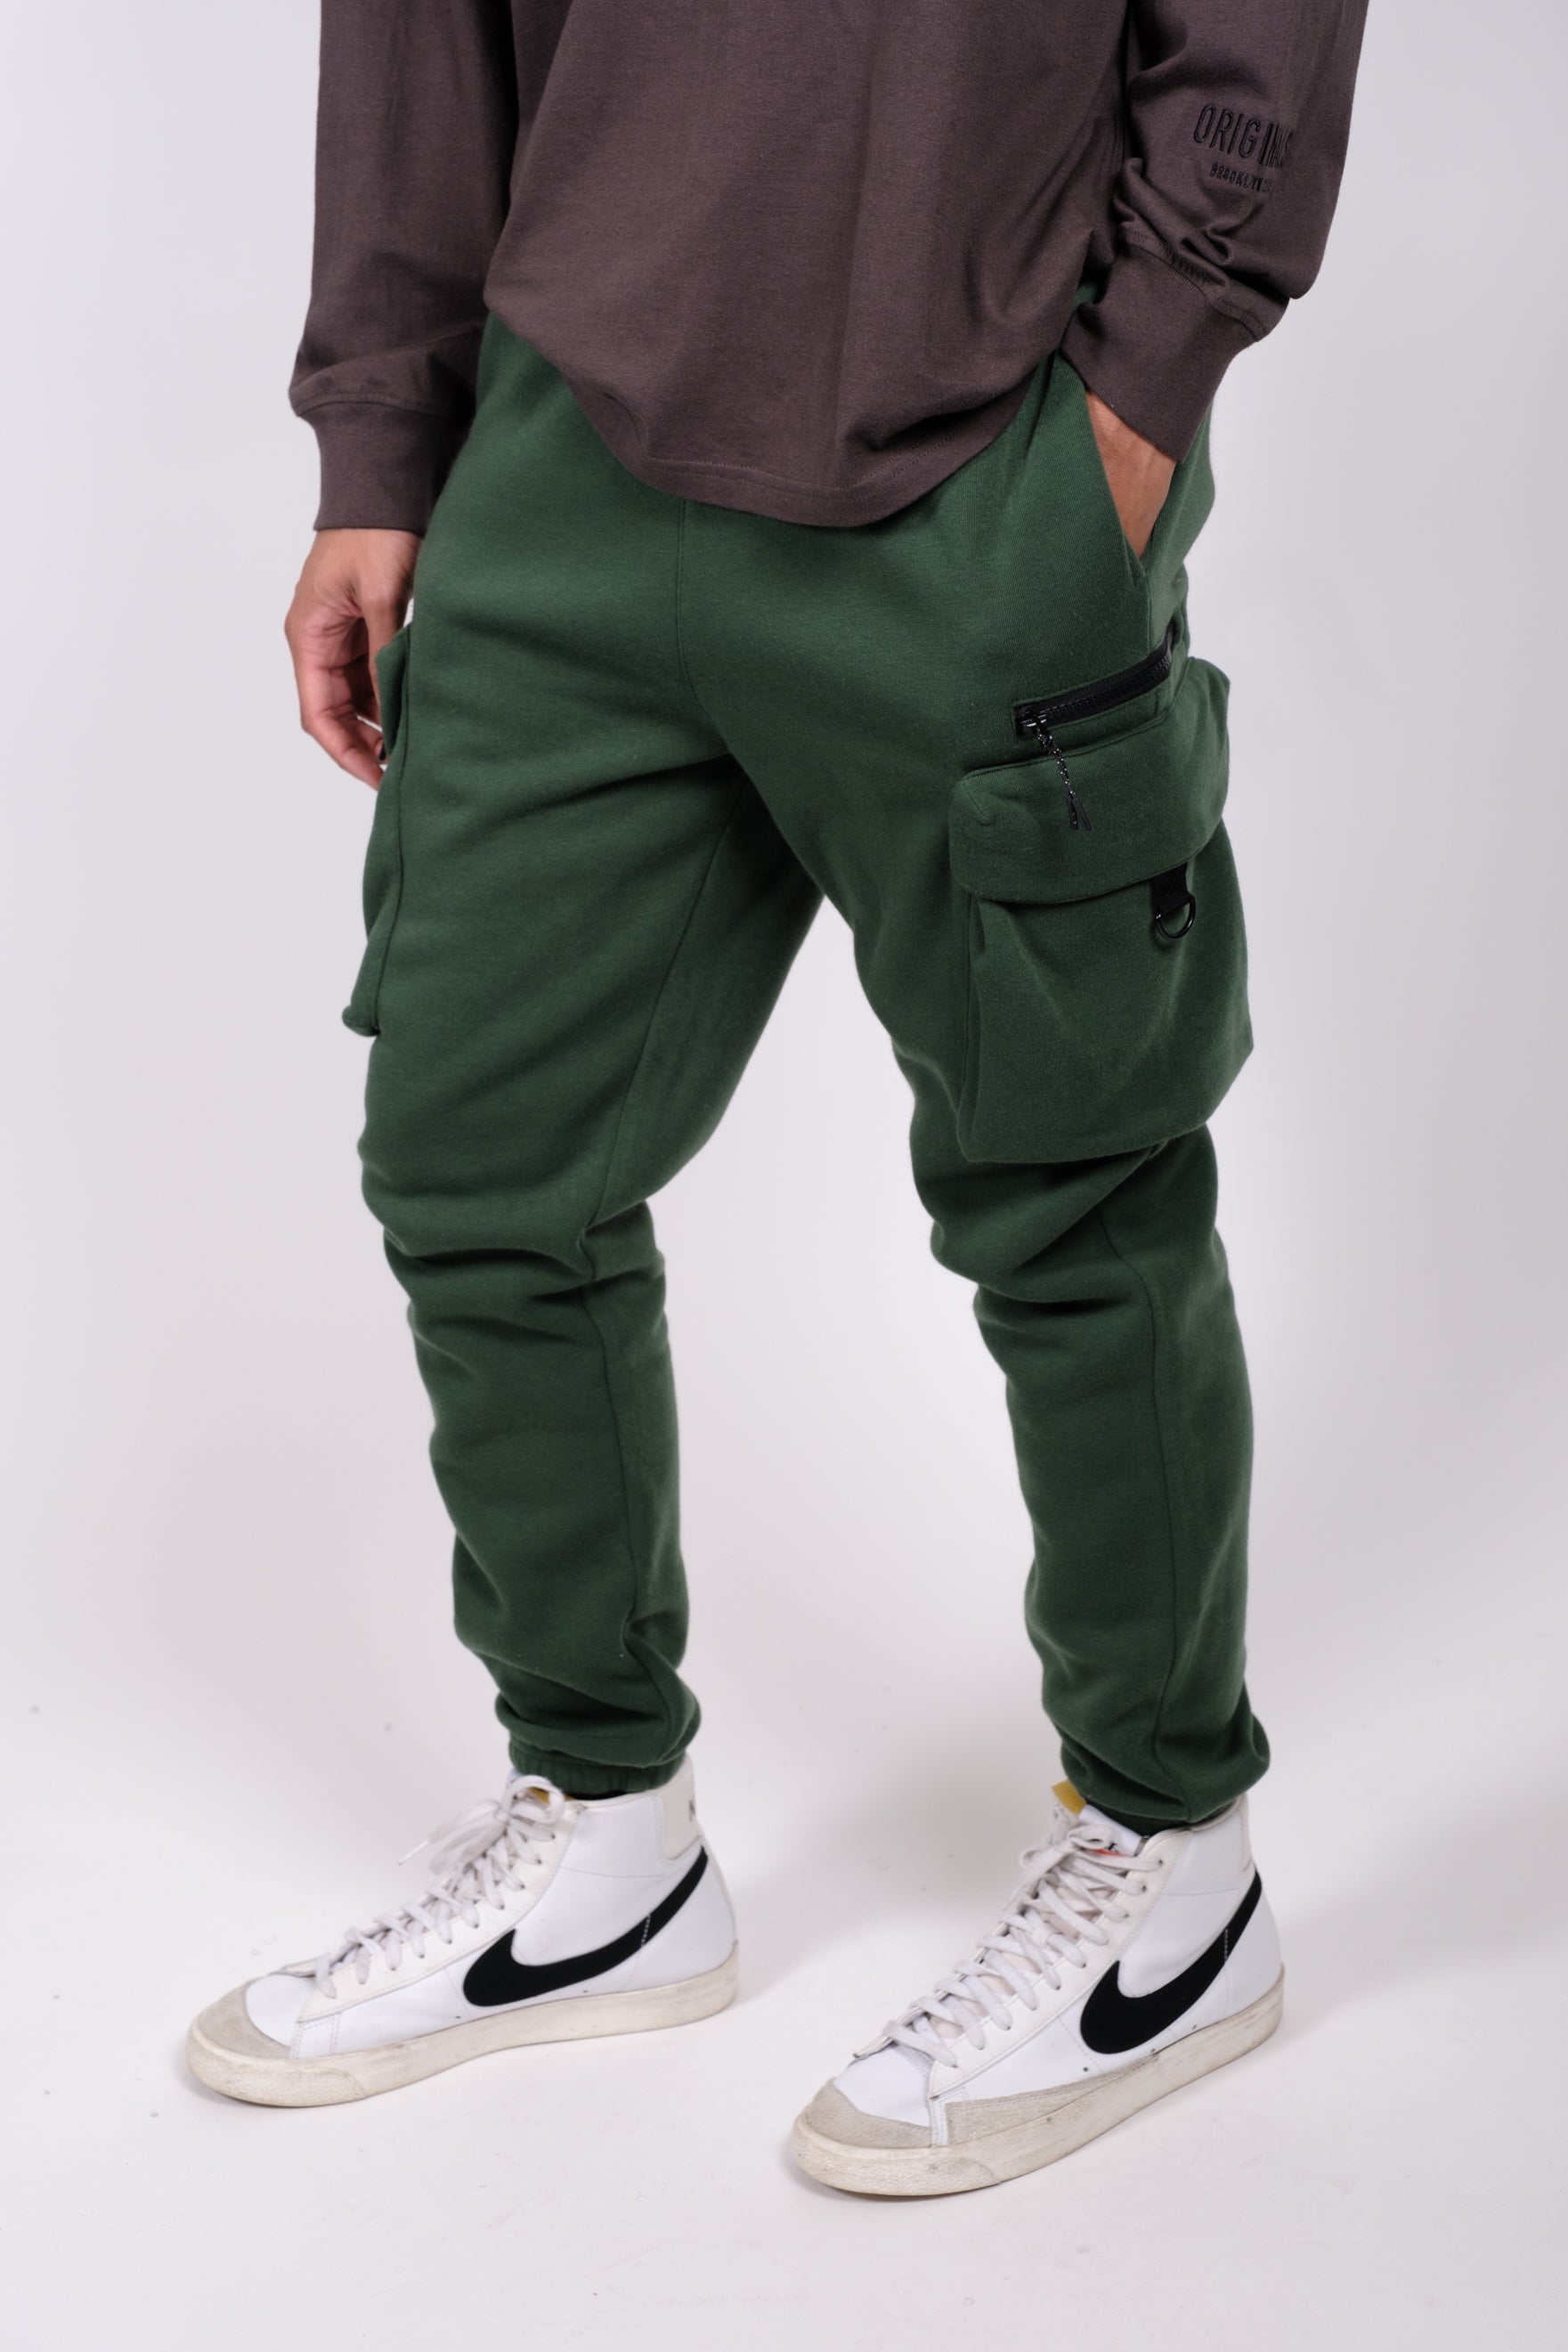 These pants are called zip pocket cargo joggers in shade duffle bag. #